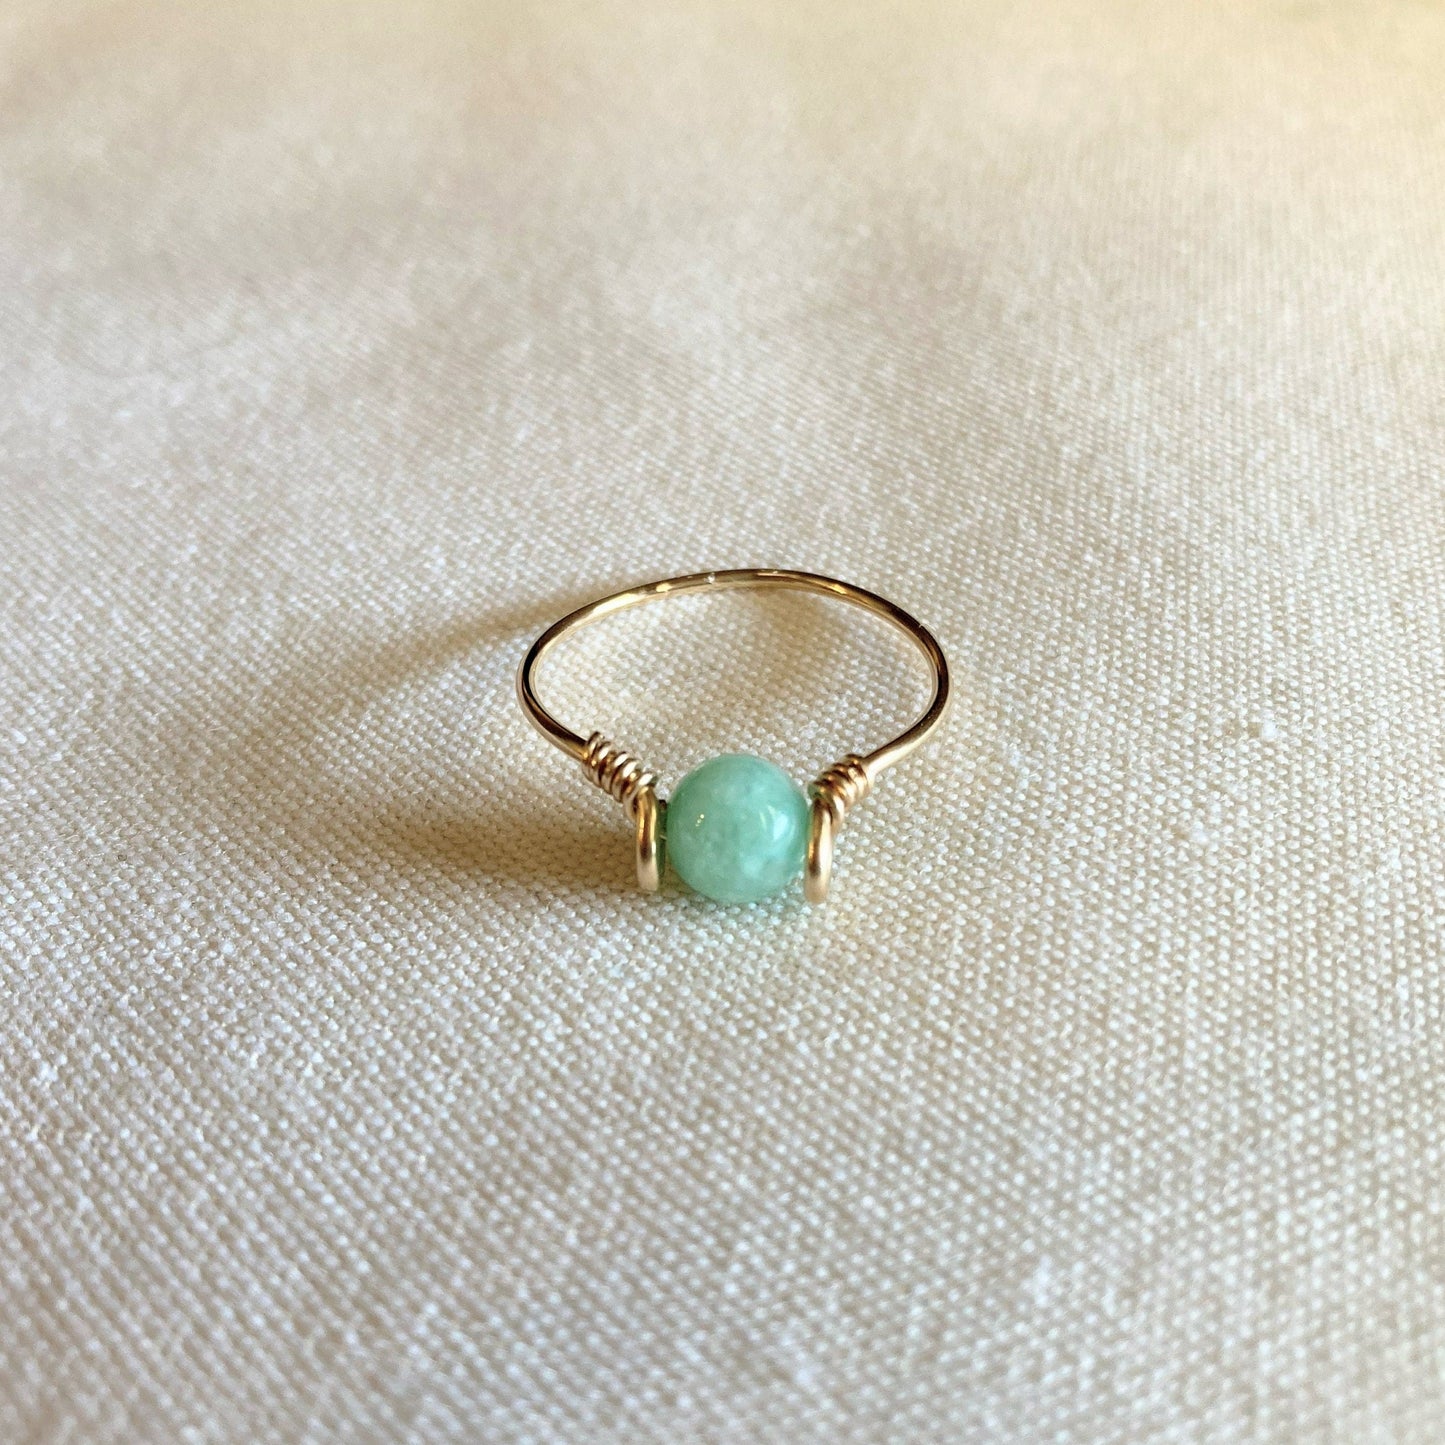 Jade, Malachite, Herkimer 14k Gold Filled Wire Rings